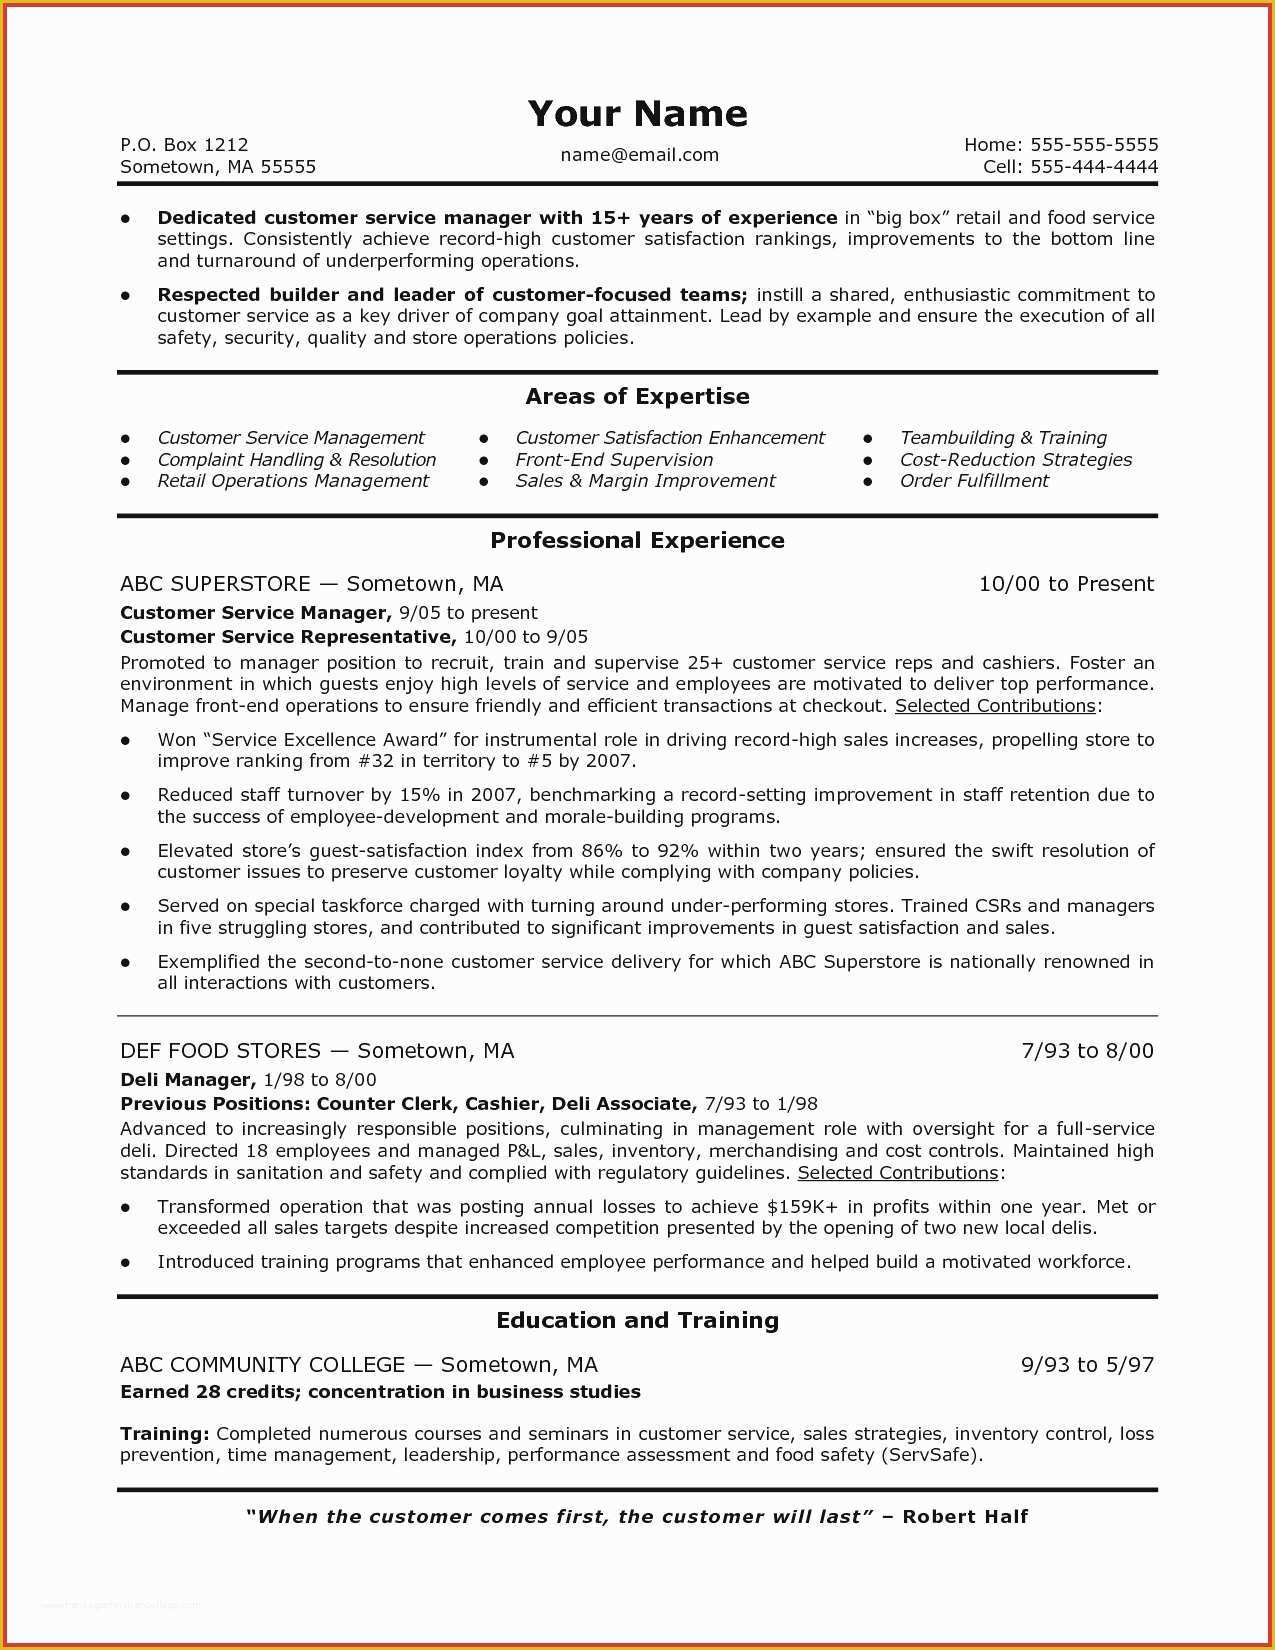 Canadian Resume Template Free Of Free Canadian Resume Templates Resume Template Canada Free